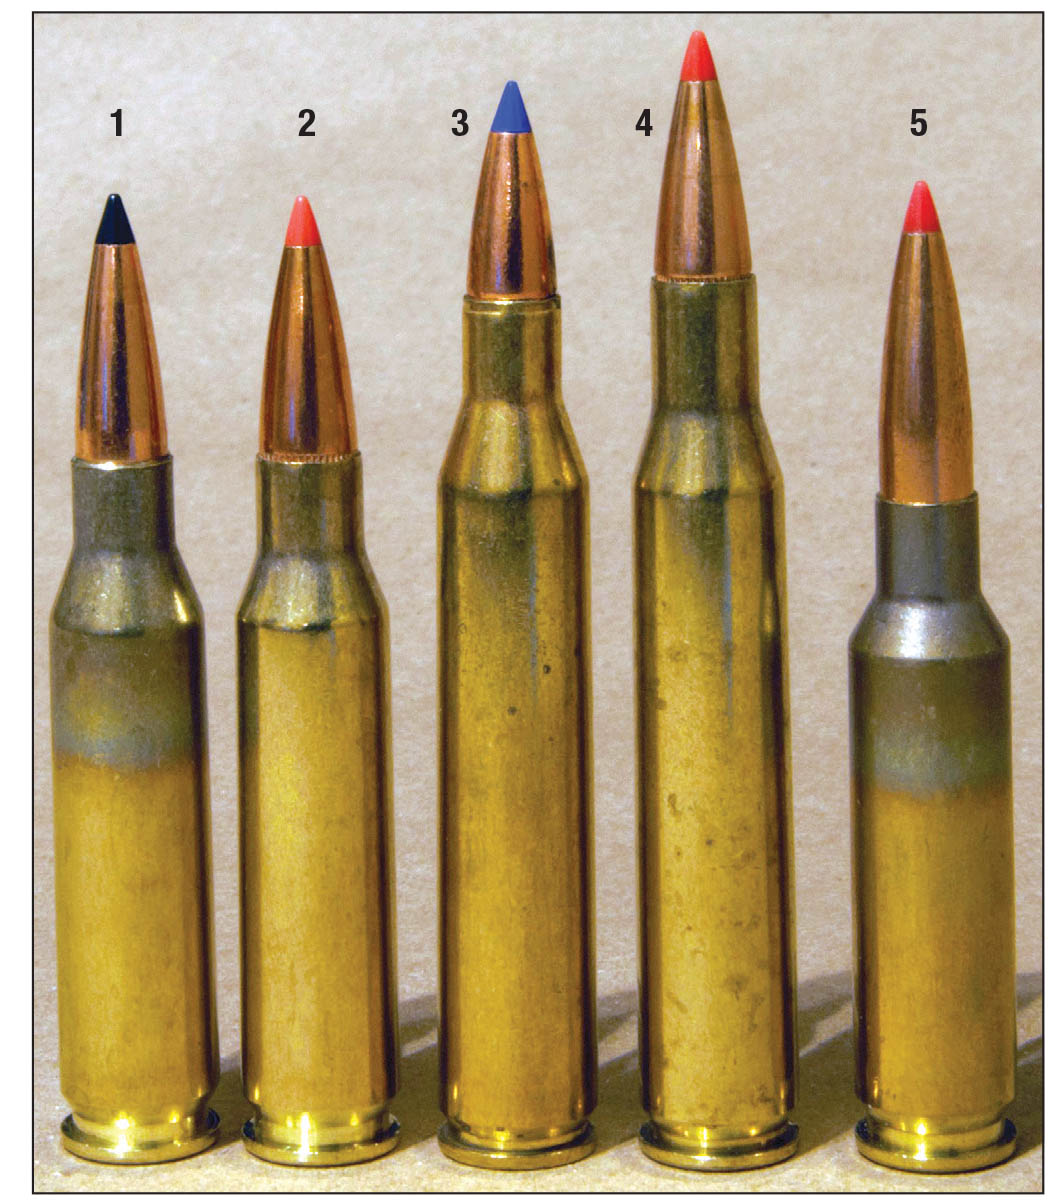 As a sporting cartridge, the (1) .260 Remington had to prove itself against the (2) 7mm-08 Remington, (3) .25-06 Remington and the (4) .270 Winchester. It has now come up against great commercial competition from the (5) 6.5 Creedmoor.